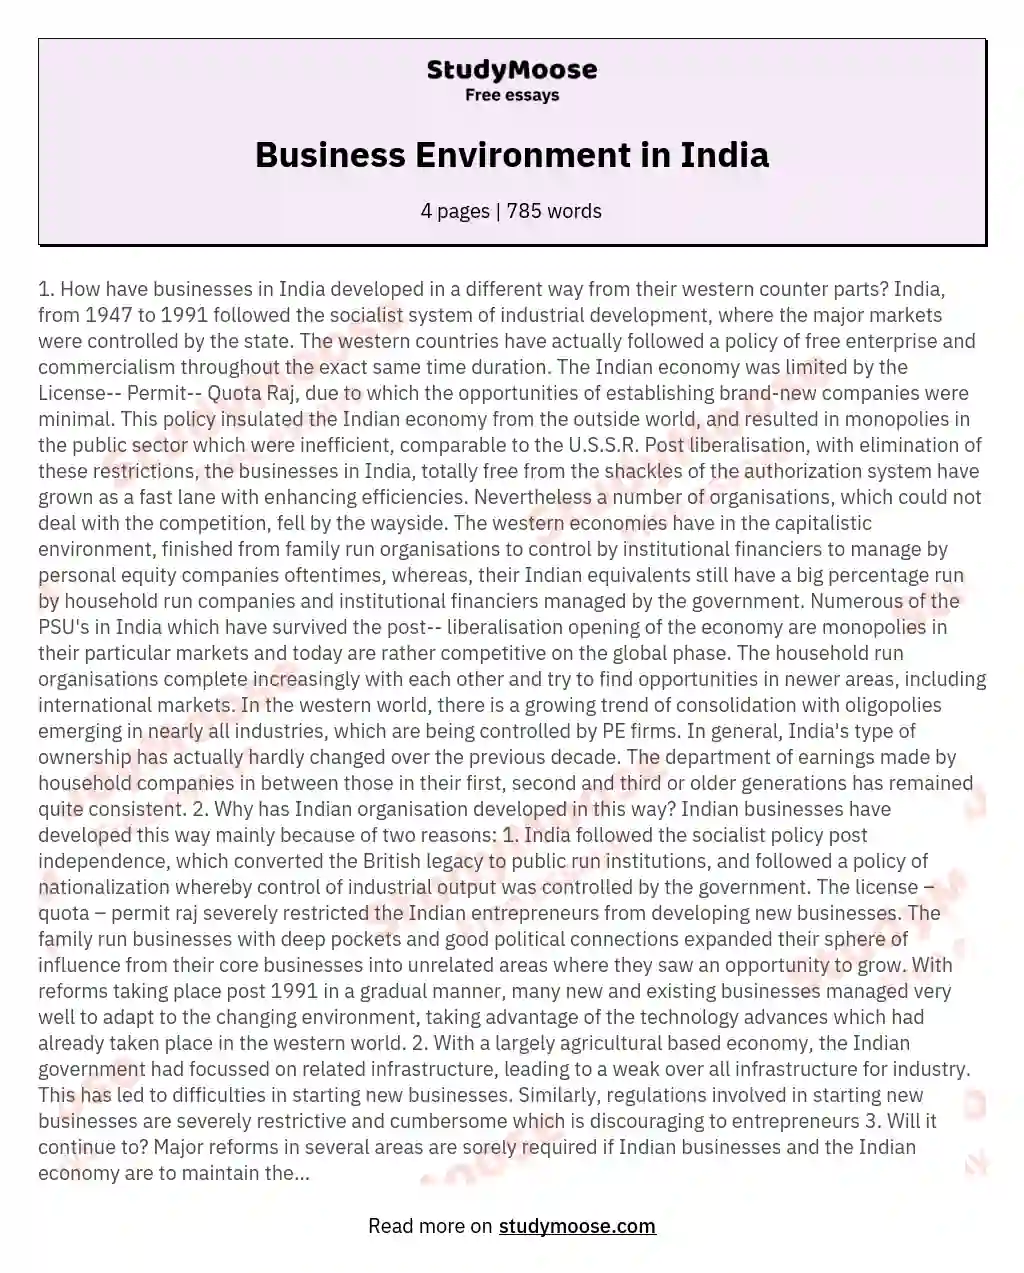 Business Environment in India essay